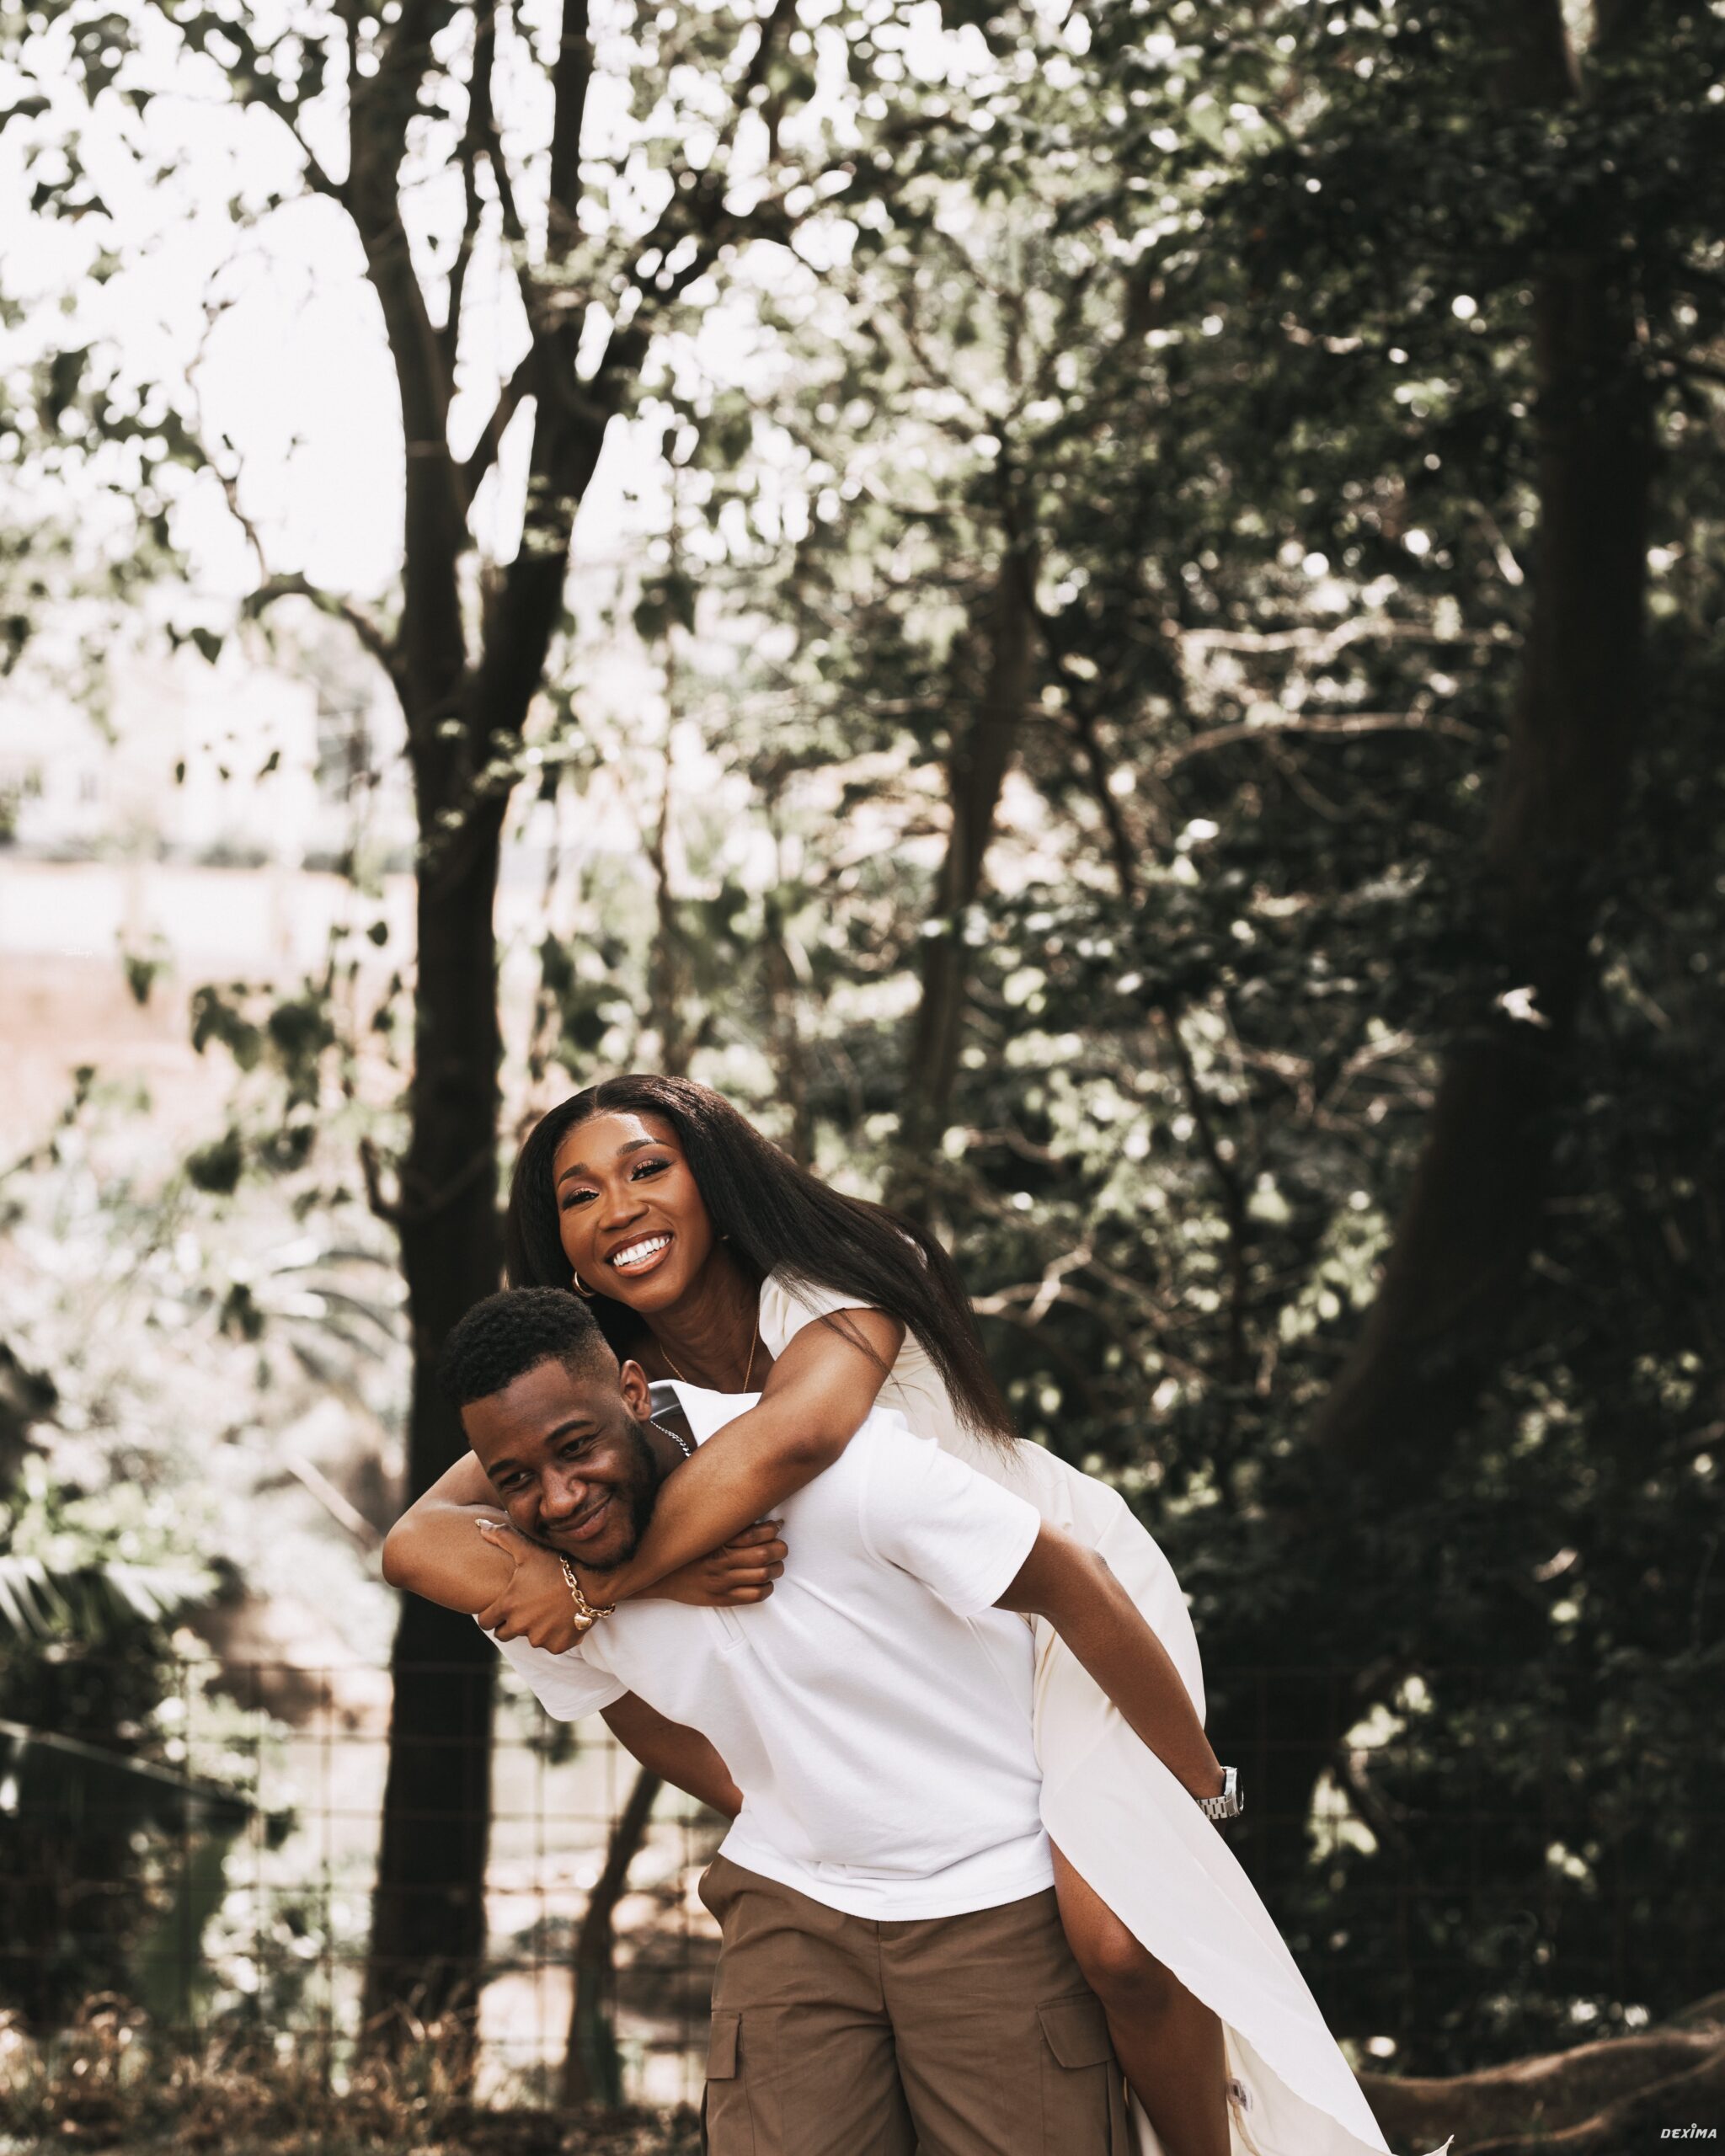 Chioma & Saliu ‘s Candy Love Was Written in The Stars! Get pleasure from Their Pre-wedding Photographs